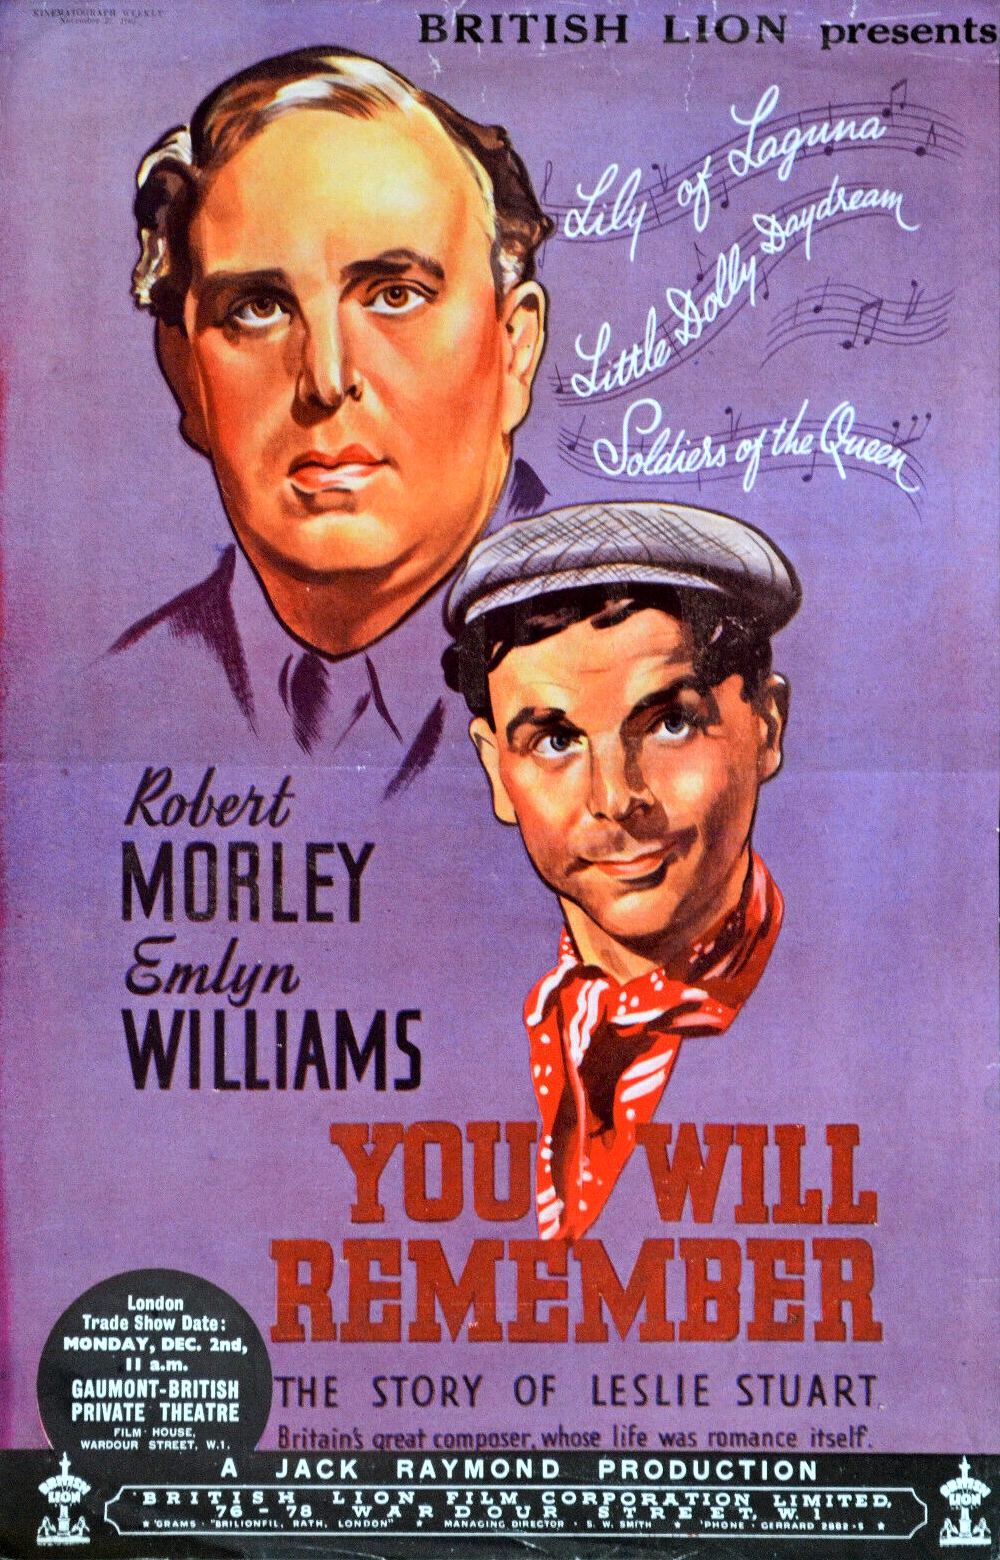 17 inch x 11 inch trade advert for You Will Remember (1941) (1) featuring Emlyn Williams and Robert Morley